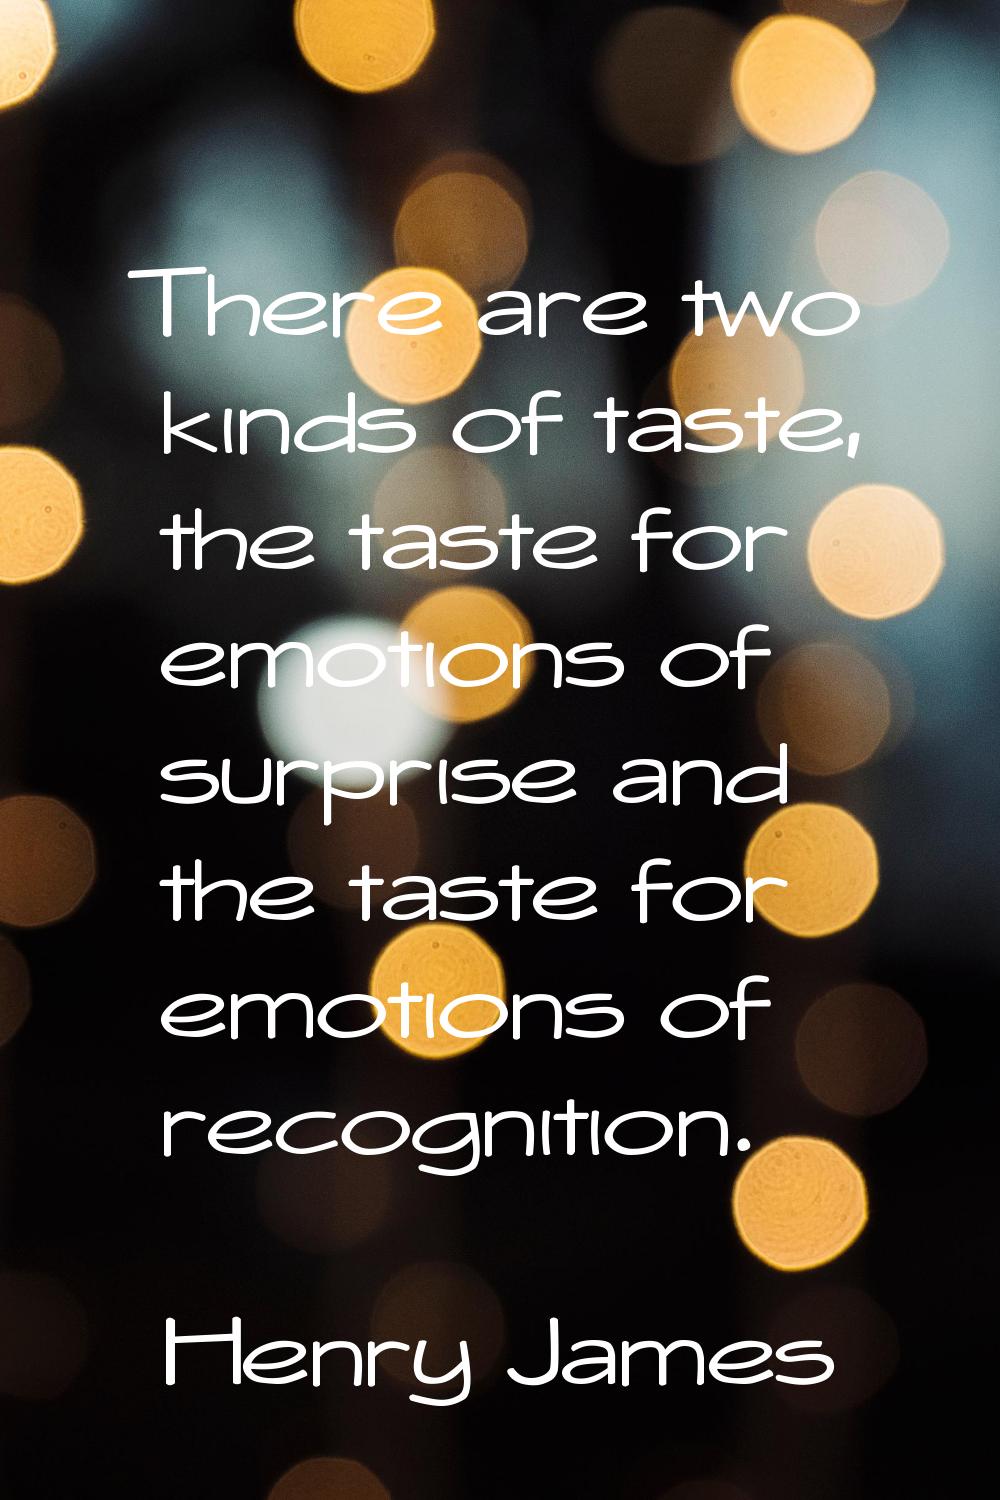 There are two kinds of taste, the taste for emotions of surprise and the taste for emotions of reco